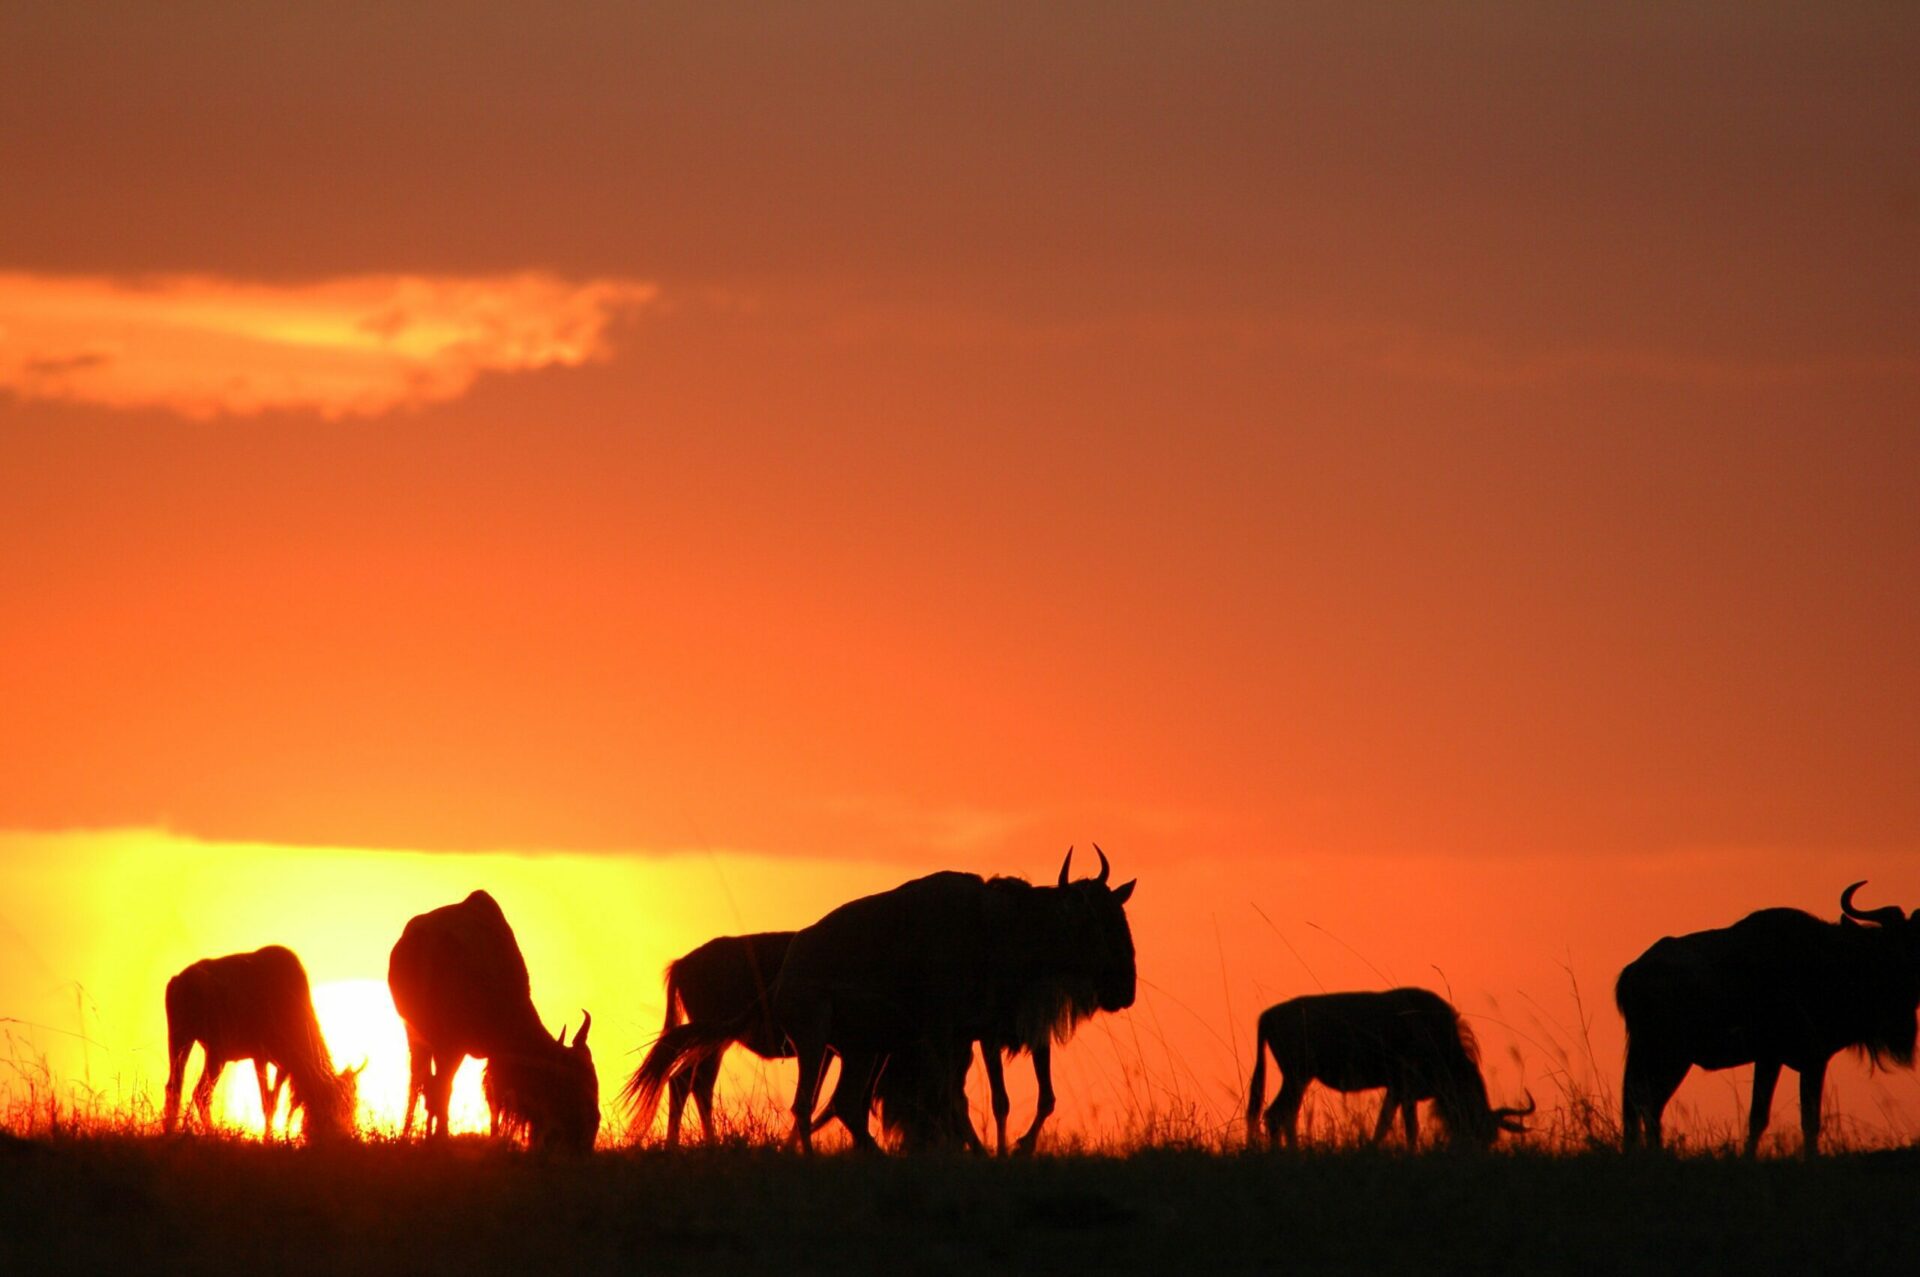 On our northern Tanzania safari see a herd of wildebeest with an orange sunset in the backdrop